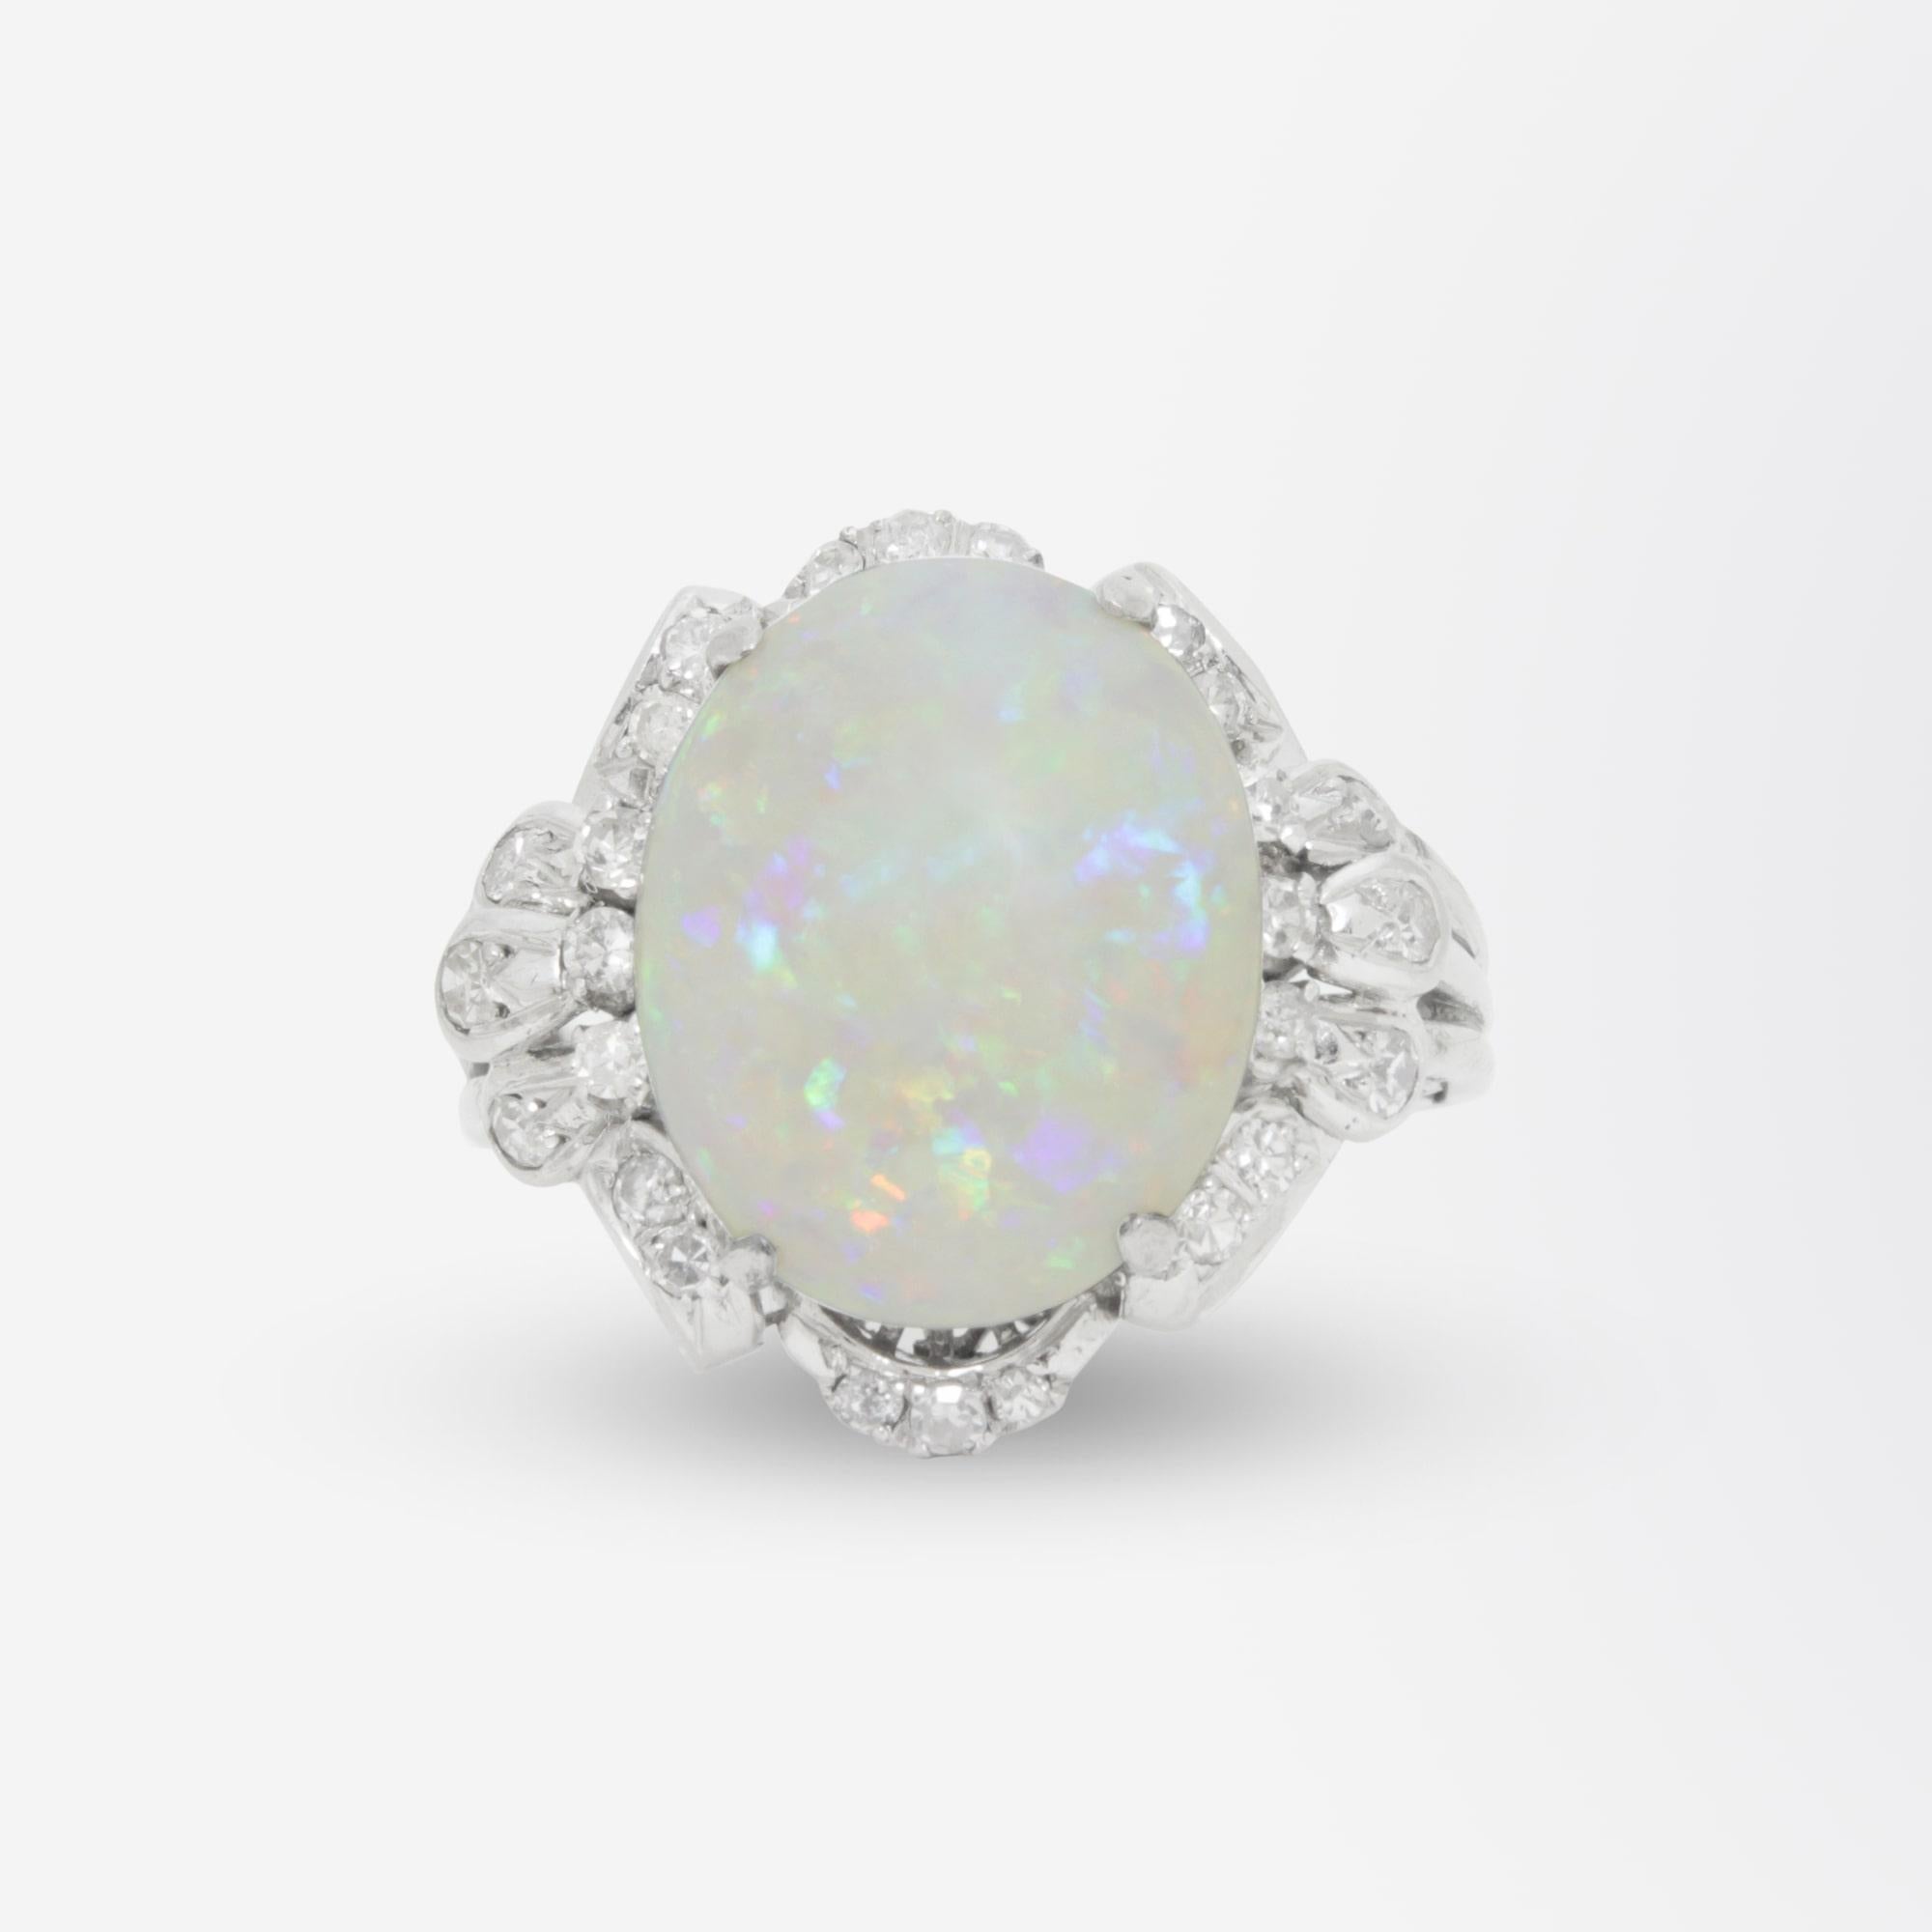 A fine late Art Deco period cocktail ring crafted from 18 karat white gold. The 27 stone ring is set with a central 6 carat oval cabochon cut white opal. The opal grades as 'white with mixed floral rolling pattern of red blue green violet flash' and